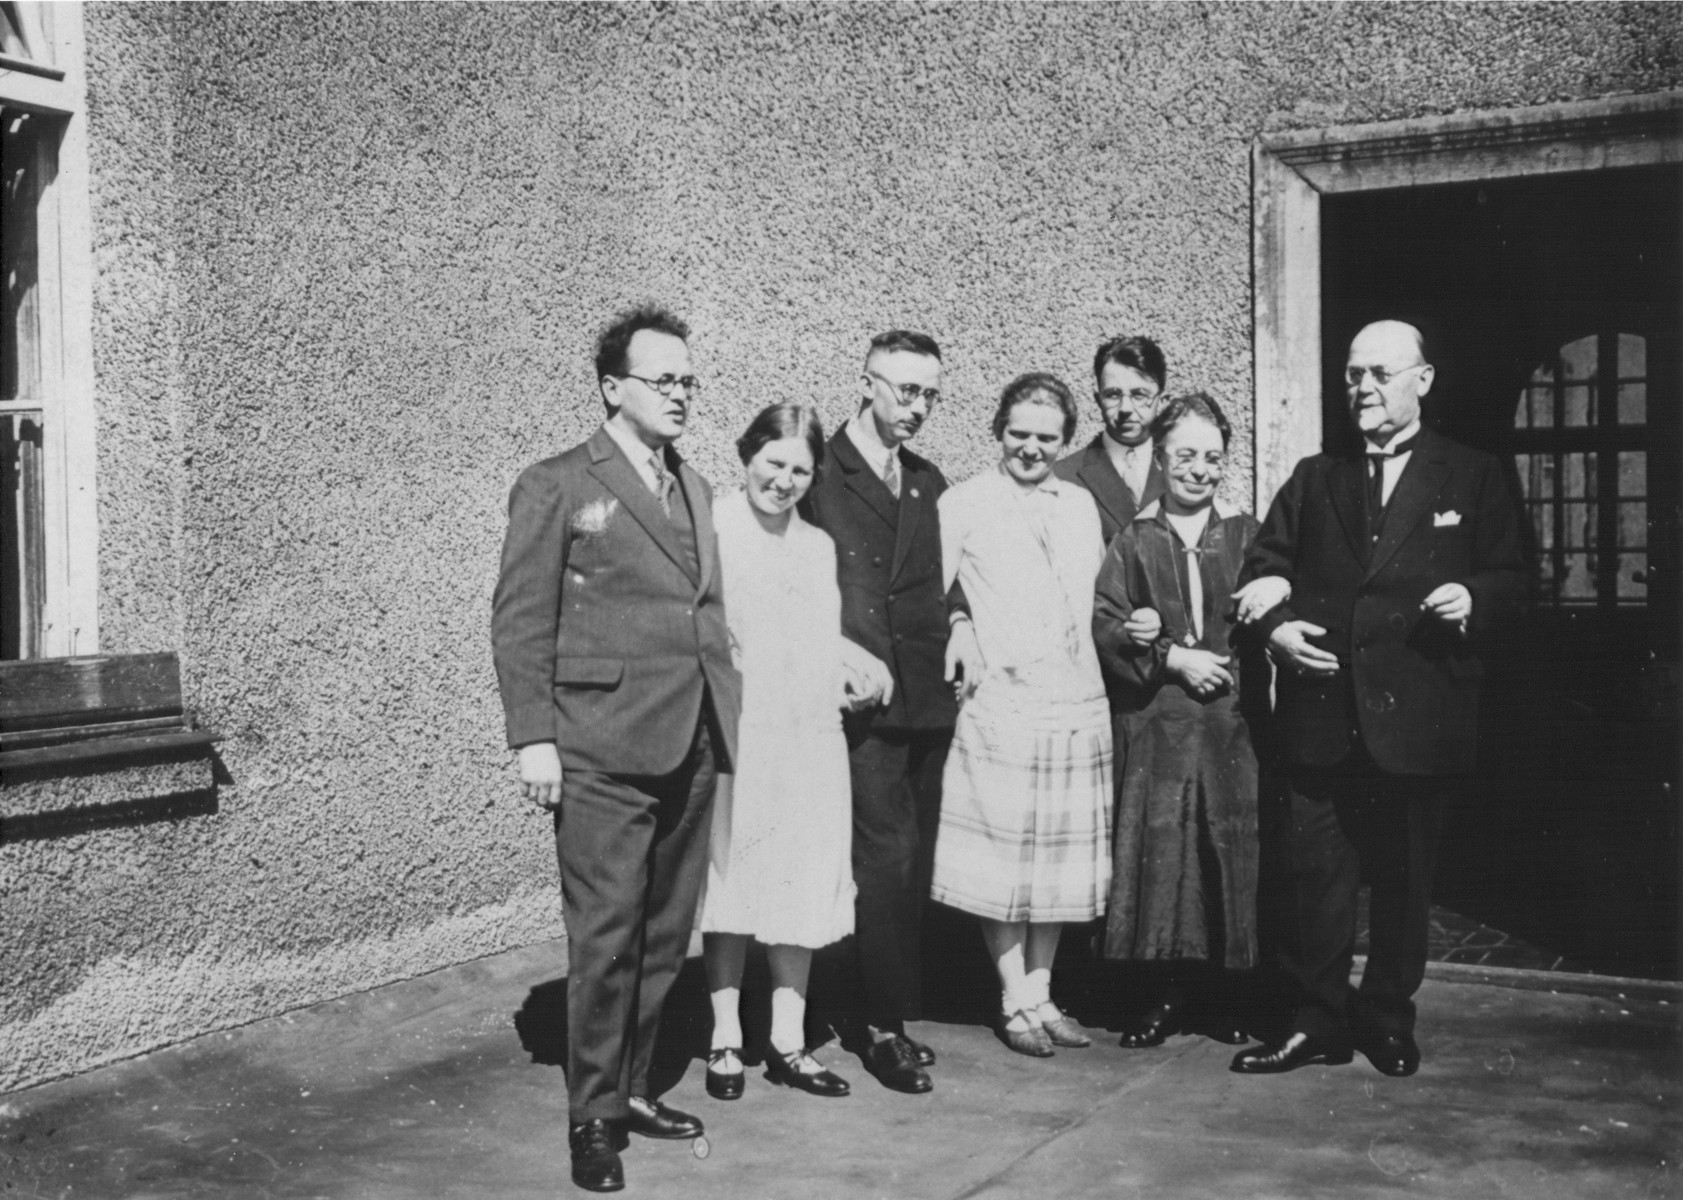 Group portrait of members of the extended Himmler family.

Pictured from right to left: Gebhard Himmler (Heinrich's father), Frau Himmler (Heinrich's mother), Ernst Himmler (Heinrich's brother), Margarete Himmler, Heinrich Himmler, fiance of Gebhard Himmler, Jr., and Gebhard Himmler, Jr. (Heinrich's brother).